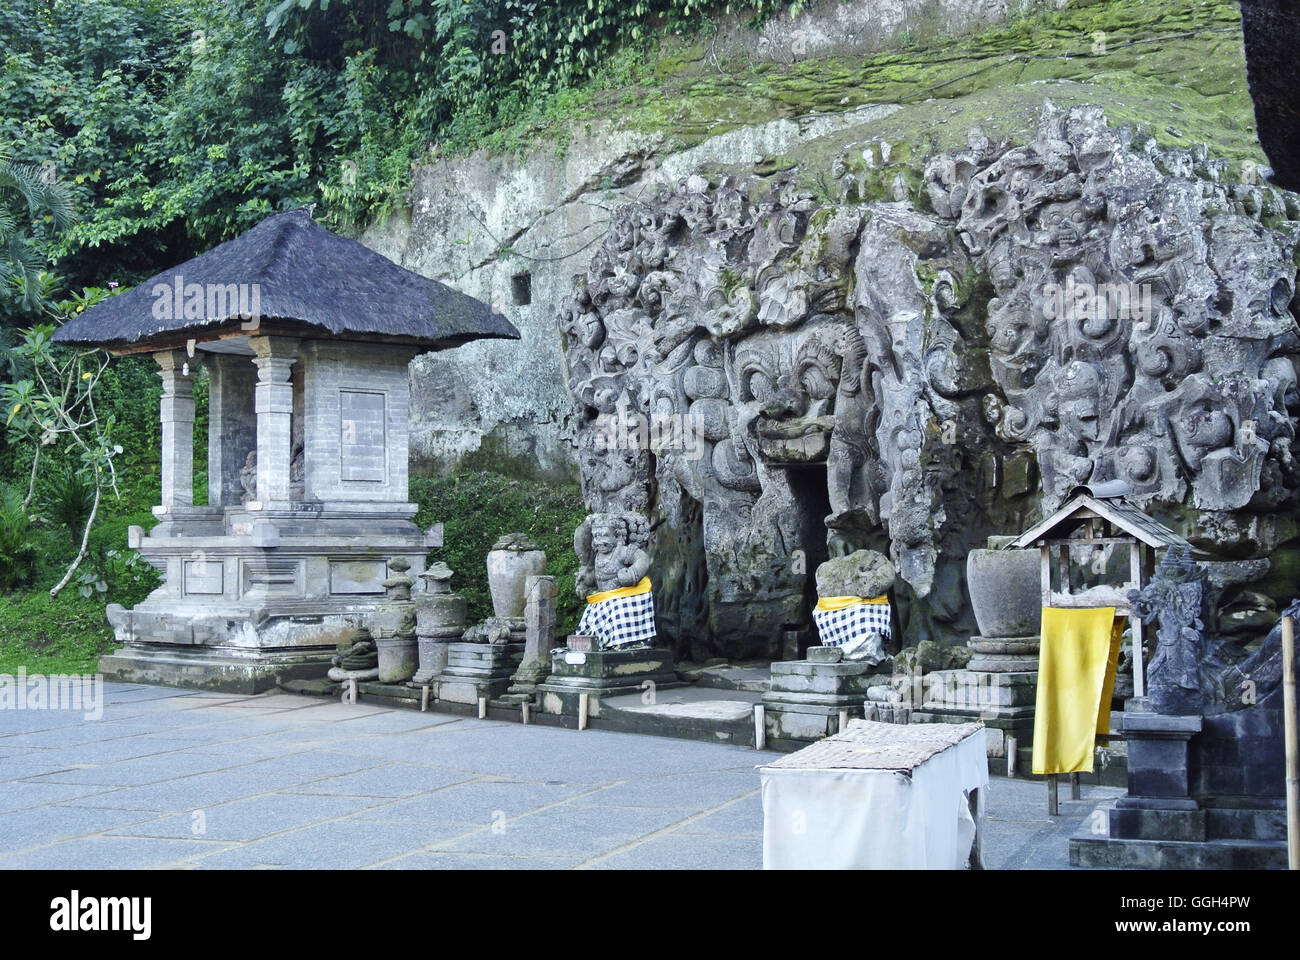 Entrance of the Goa Gajah also known as Elephant Cave, Indonesia. Located on the island of Bali near Ubud, in Indonesia. Built i Stock Photo